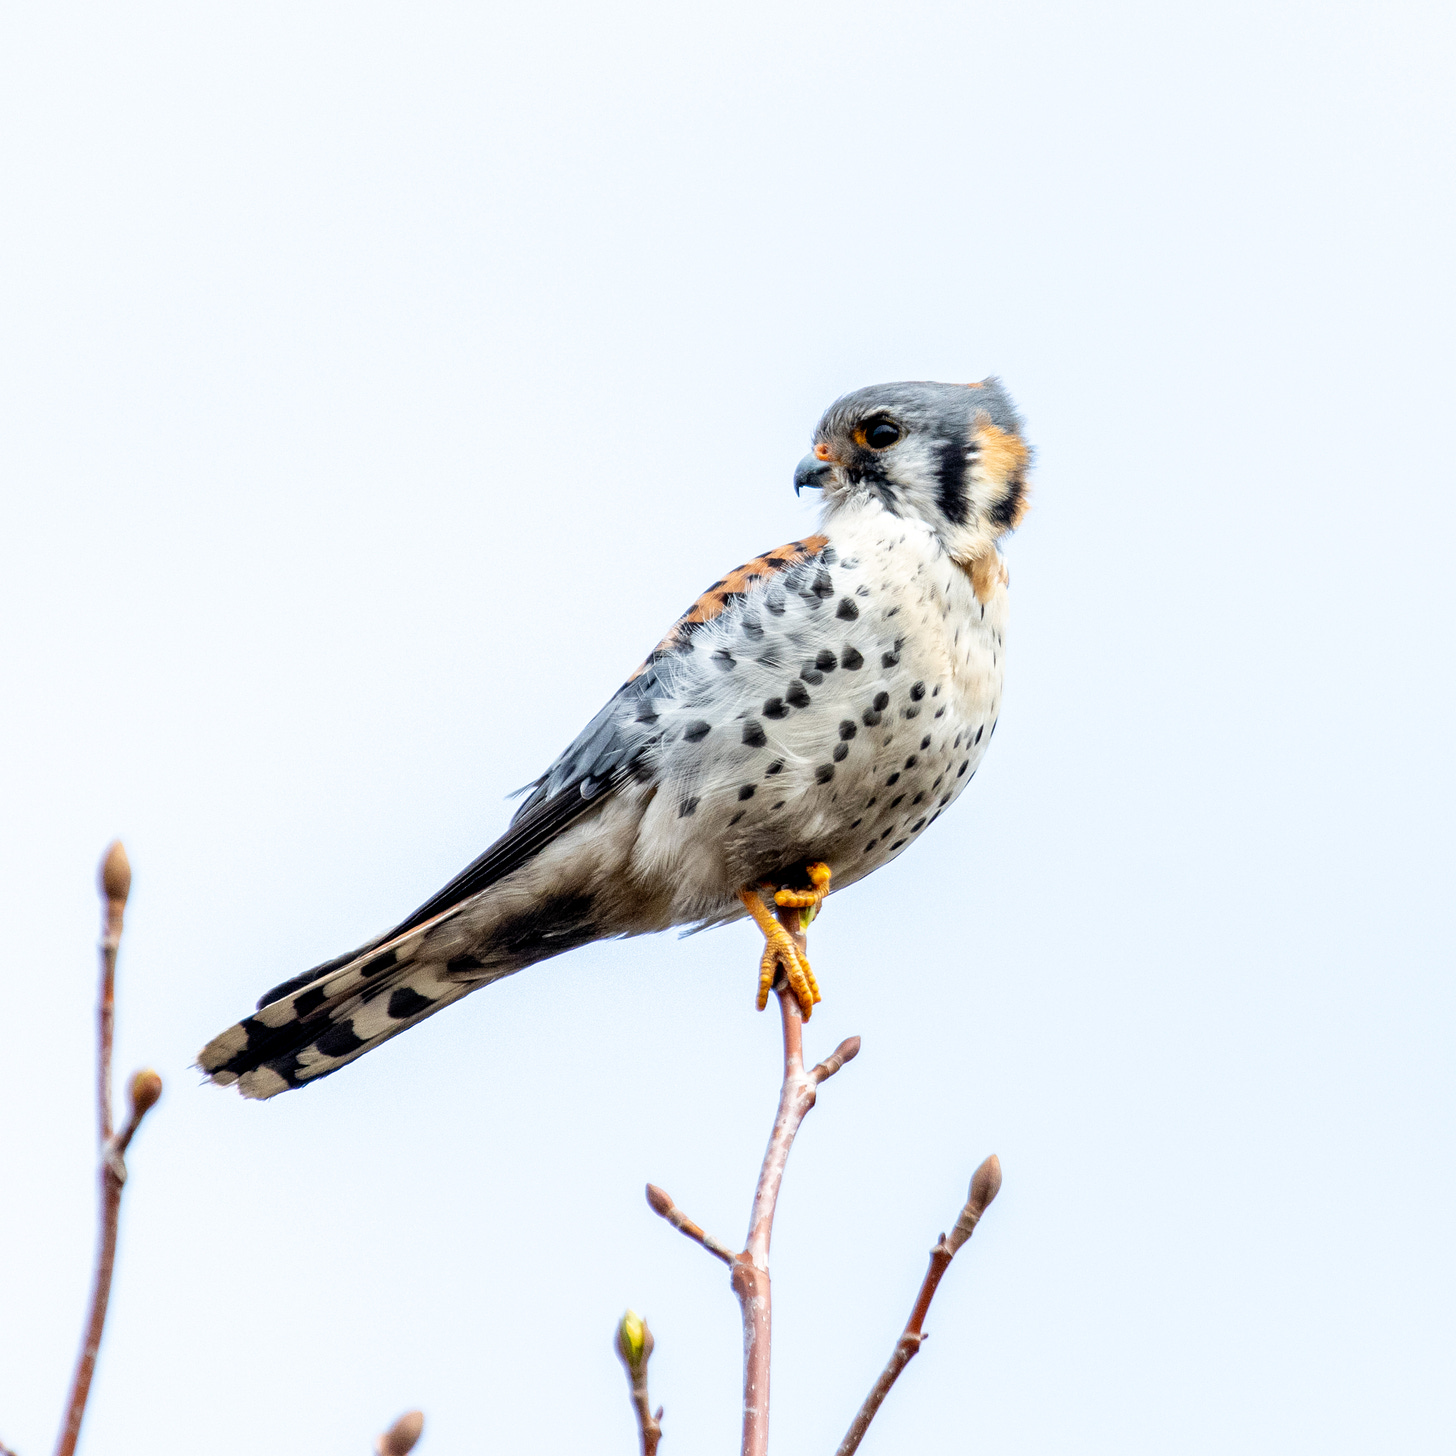 An American kestrel in profile, looking back over its tail